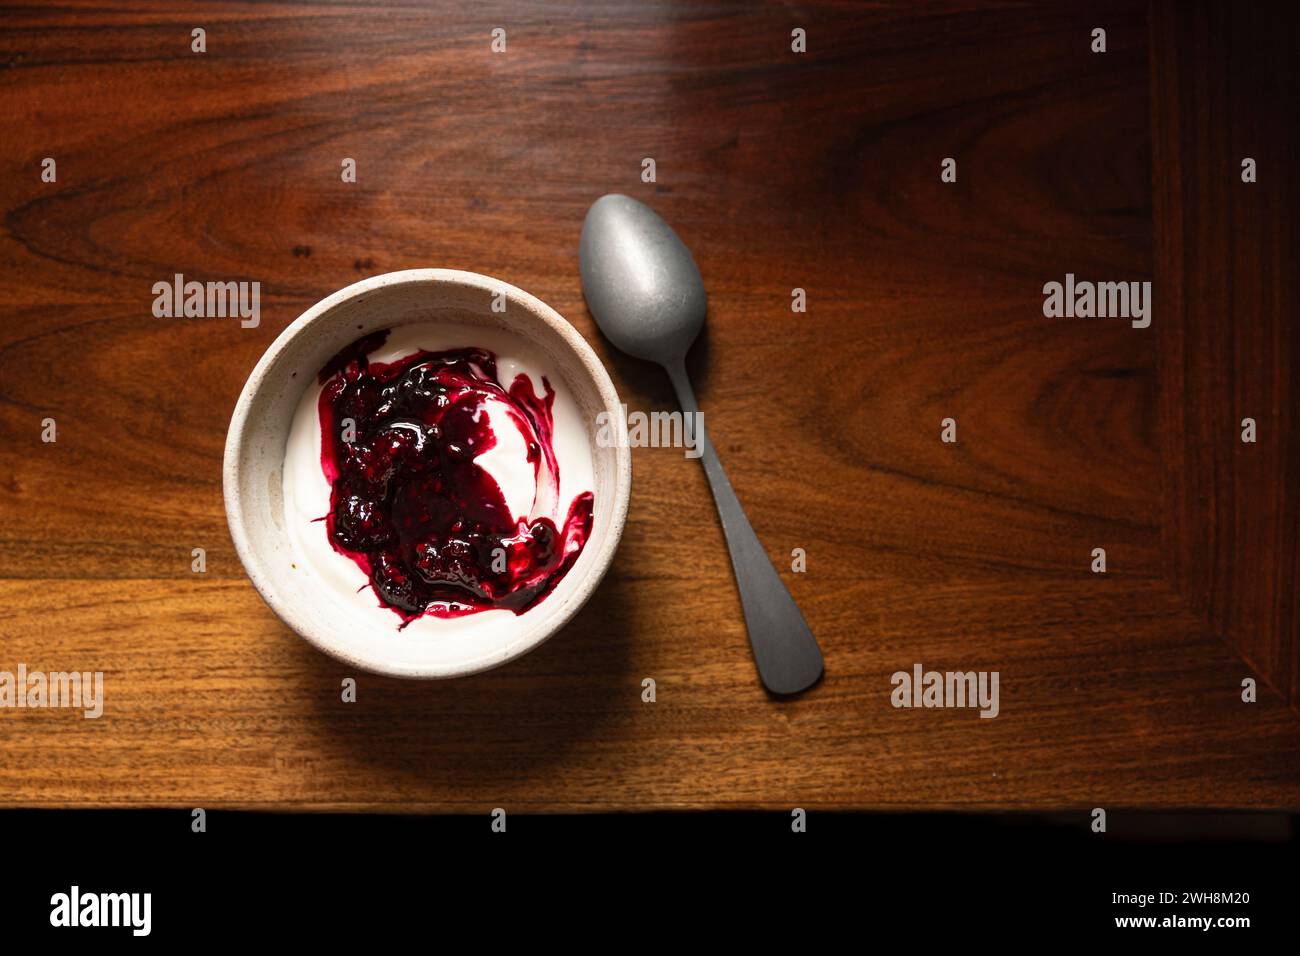 Bowl of yoghurt and blackberry compot on antinque wooden table with silver spoon. Stock Photo